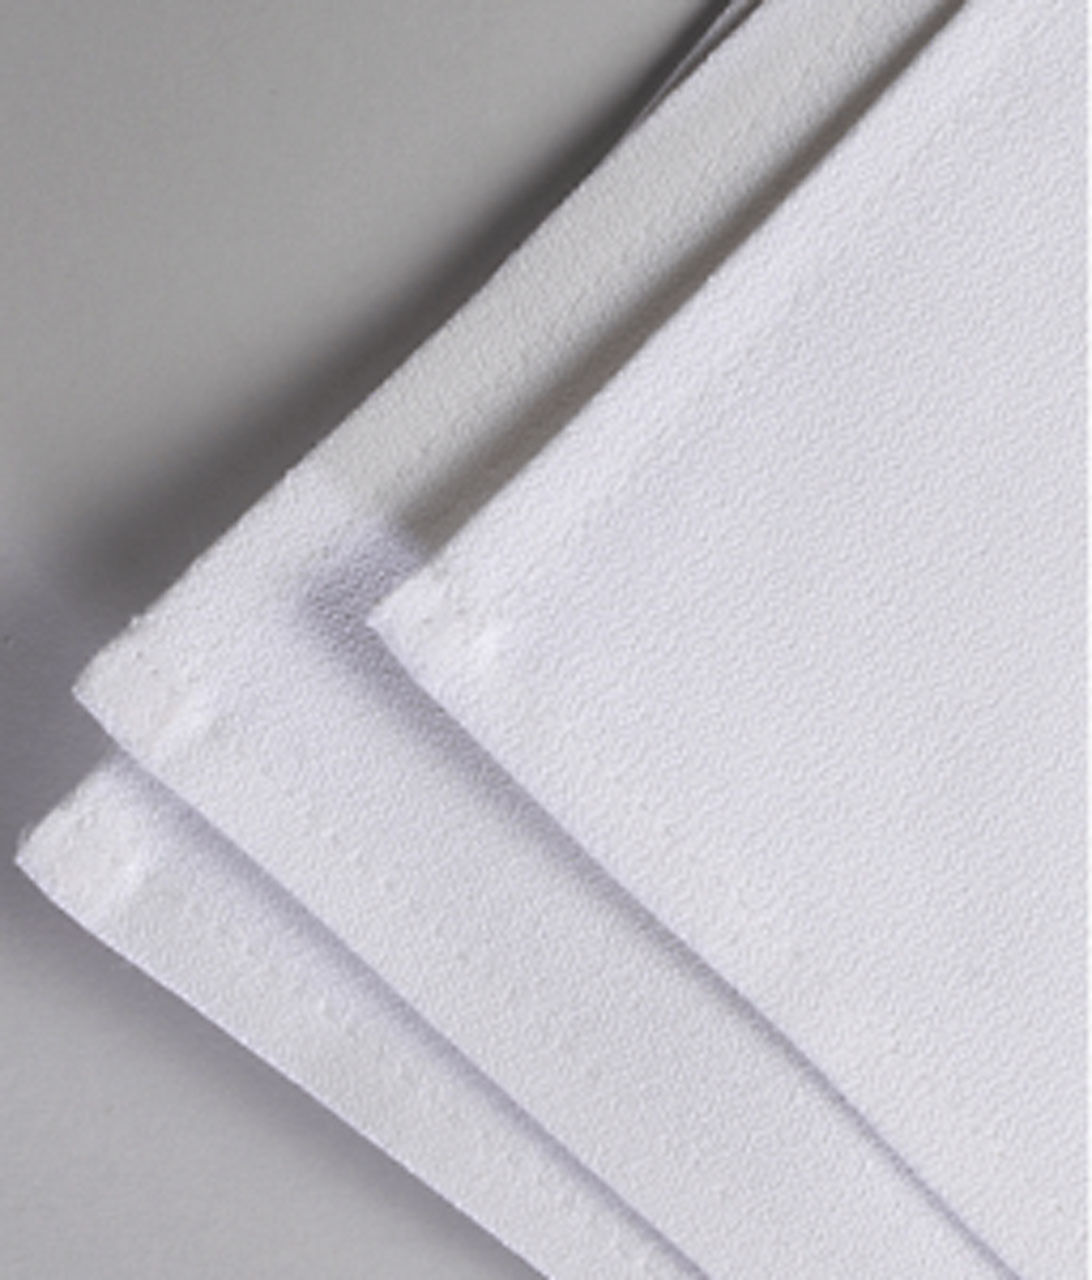 Before buying, what's the use of this momie cloth White Cotton Napkins?